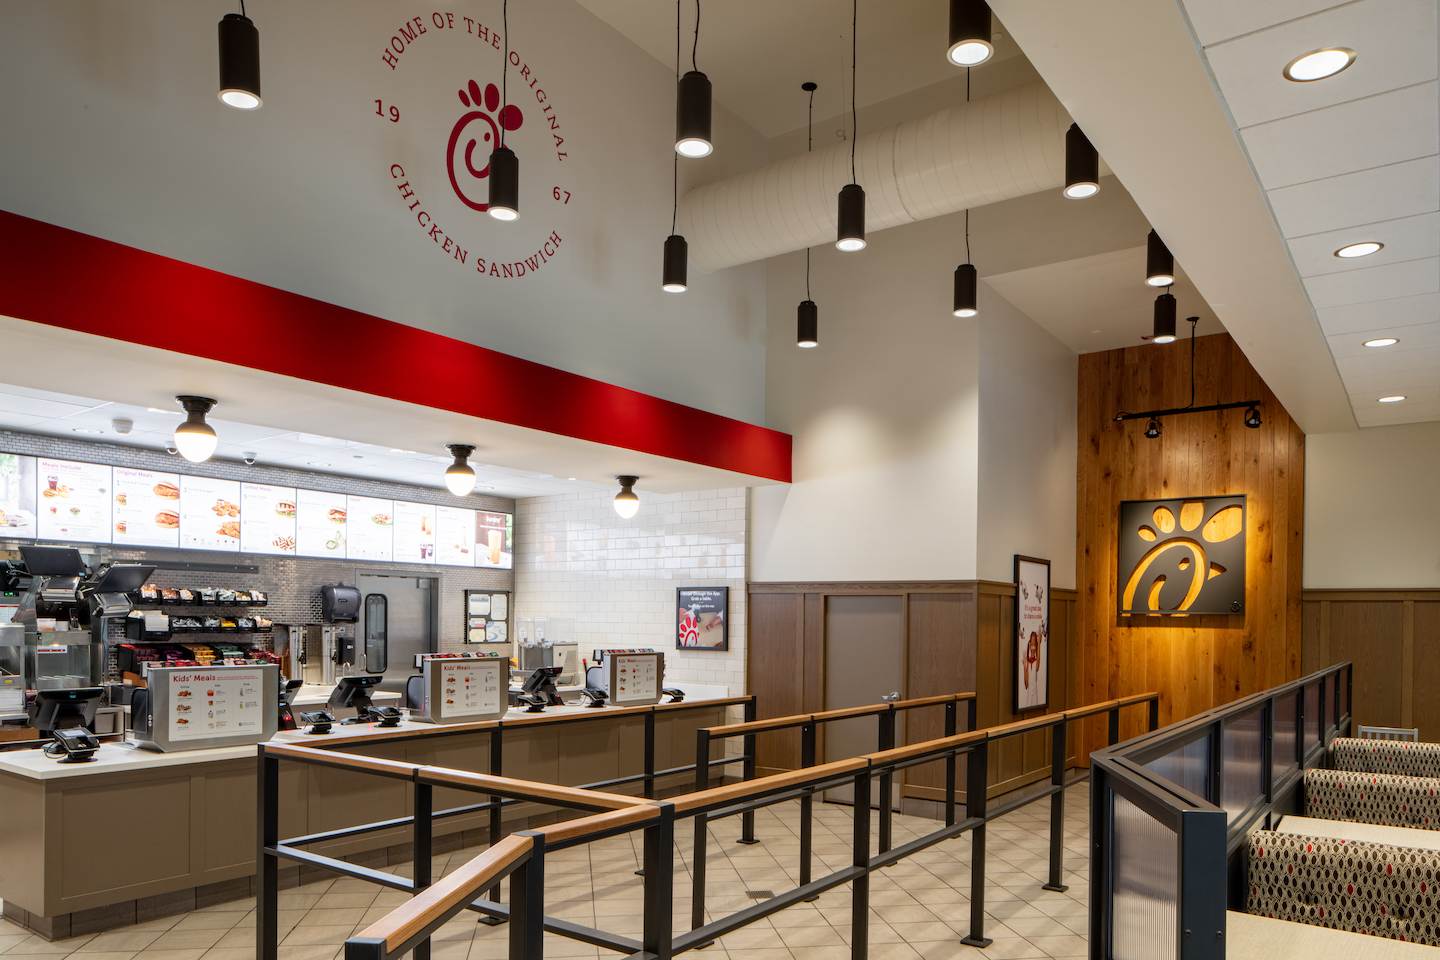 White interior of a Chick-fil-A with a brown wooden Chick-fil-A logo in the background.